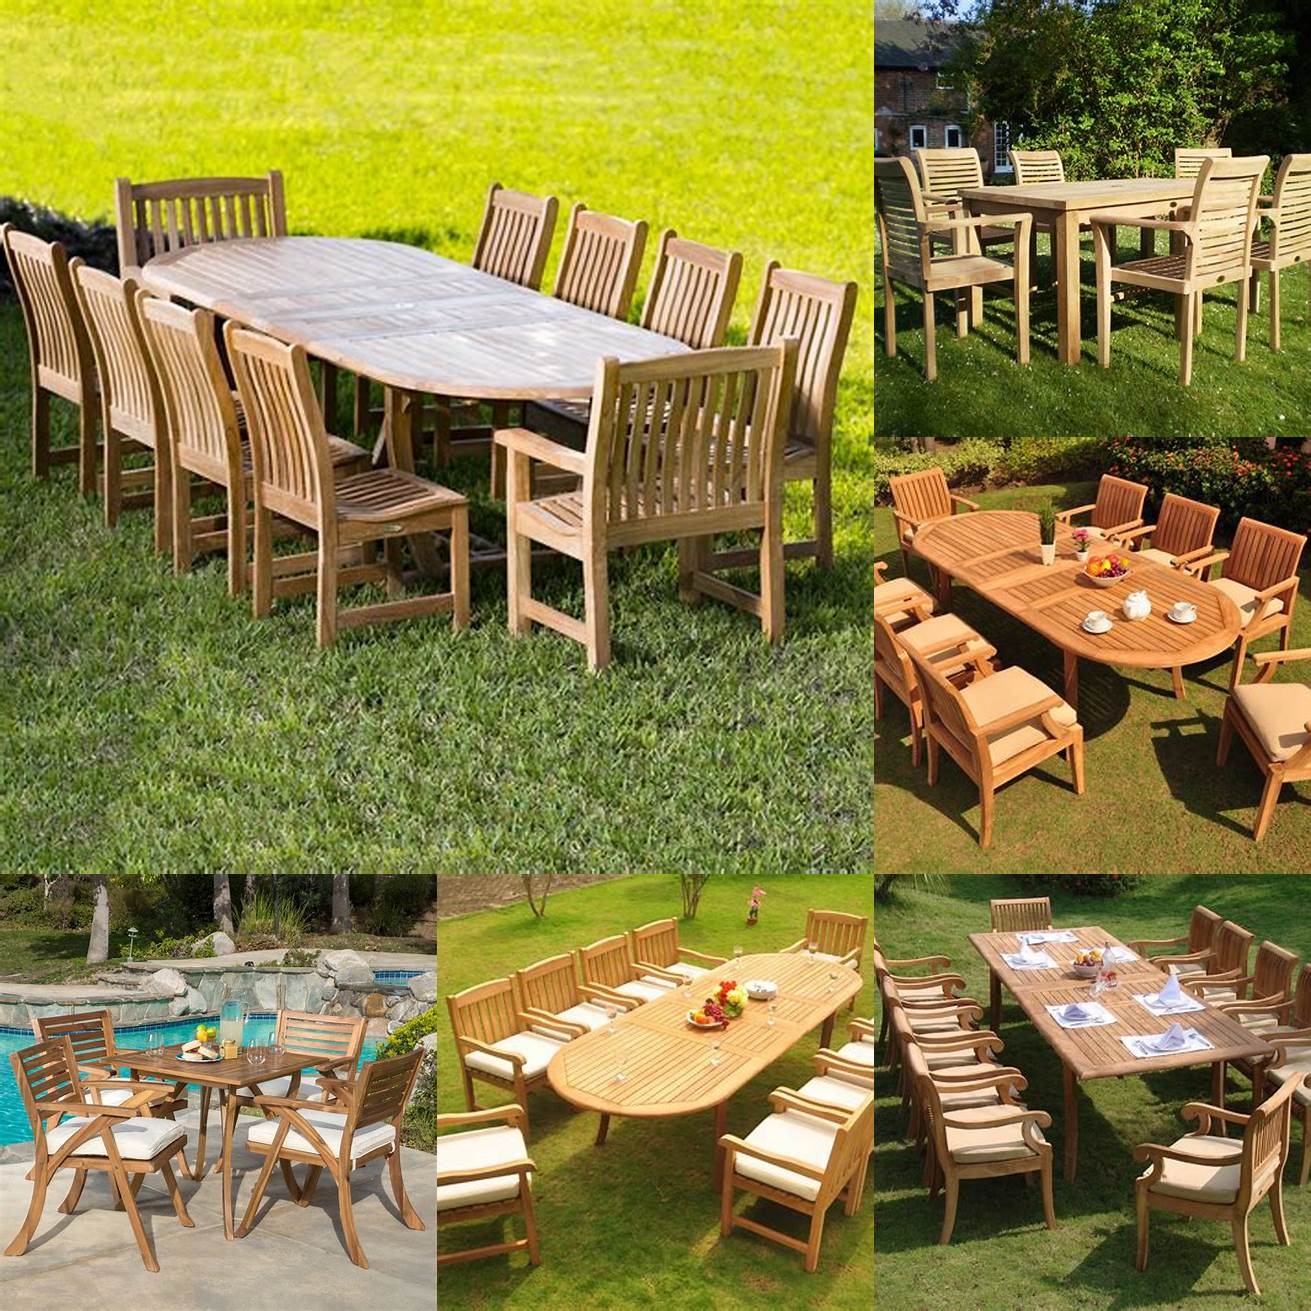 Picture of a teak garden furniture set in a beautiful outdoor setting